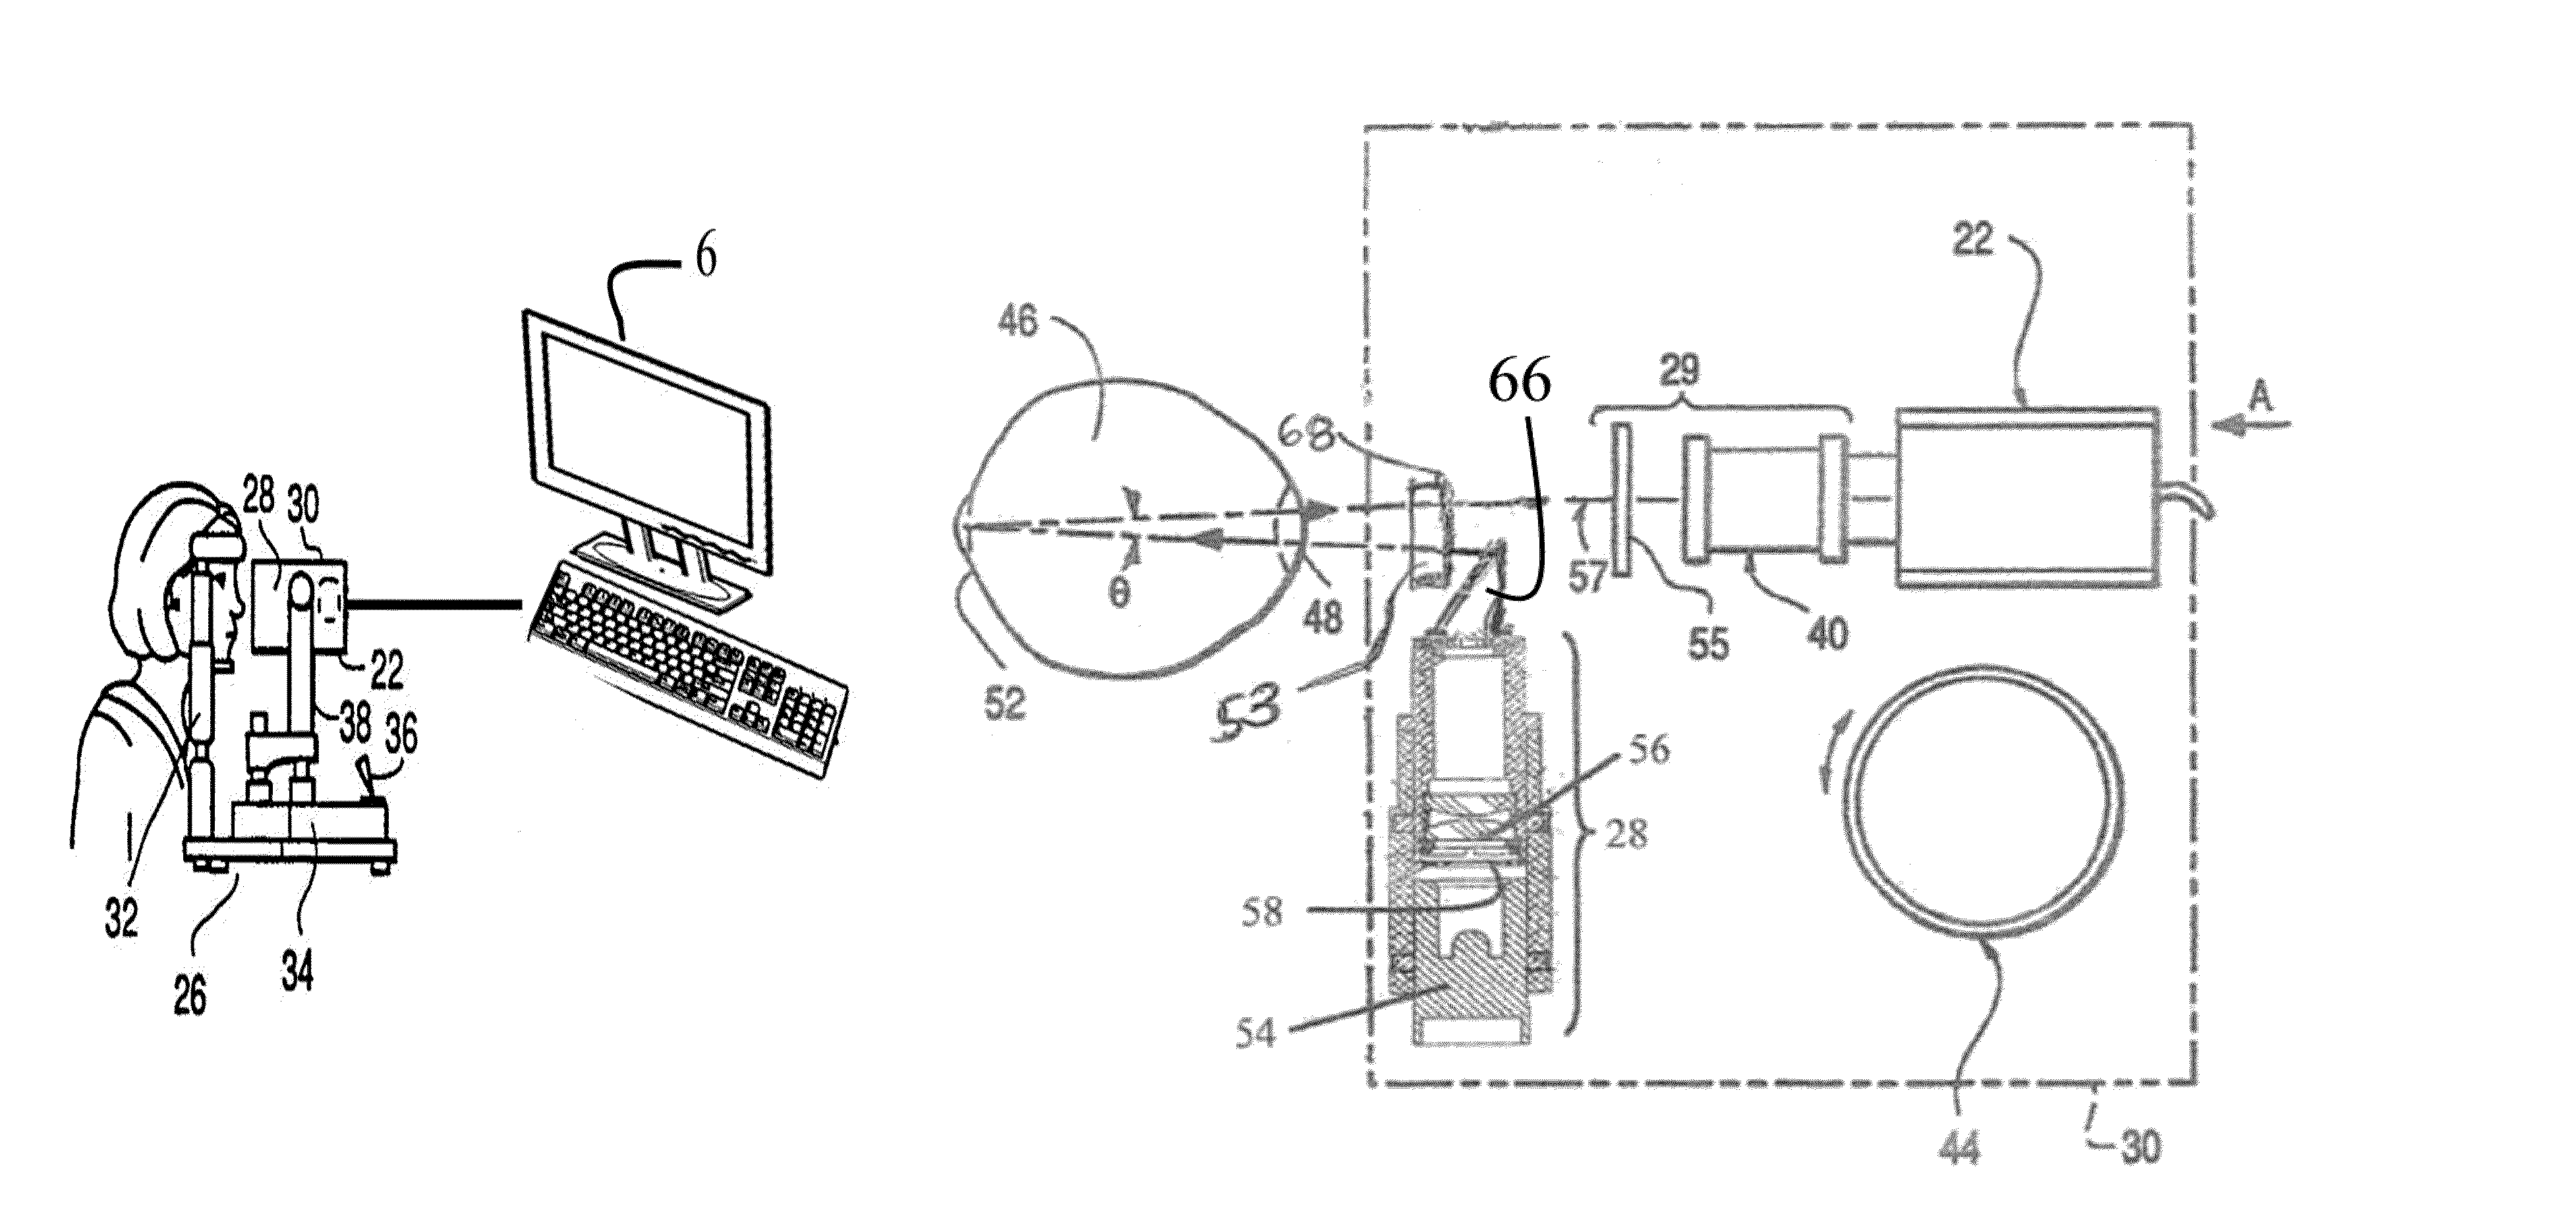 Apparatus and method for imaging the eye